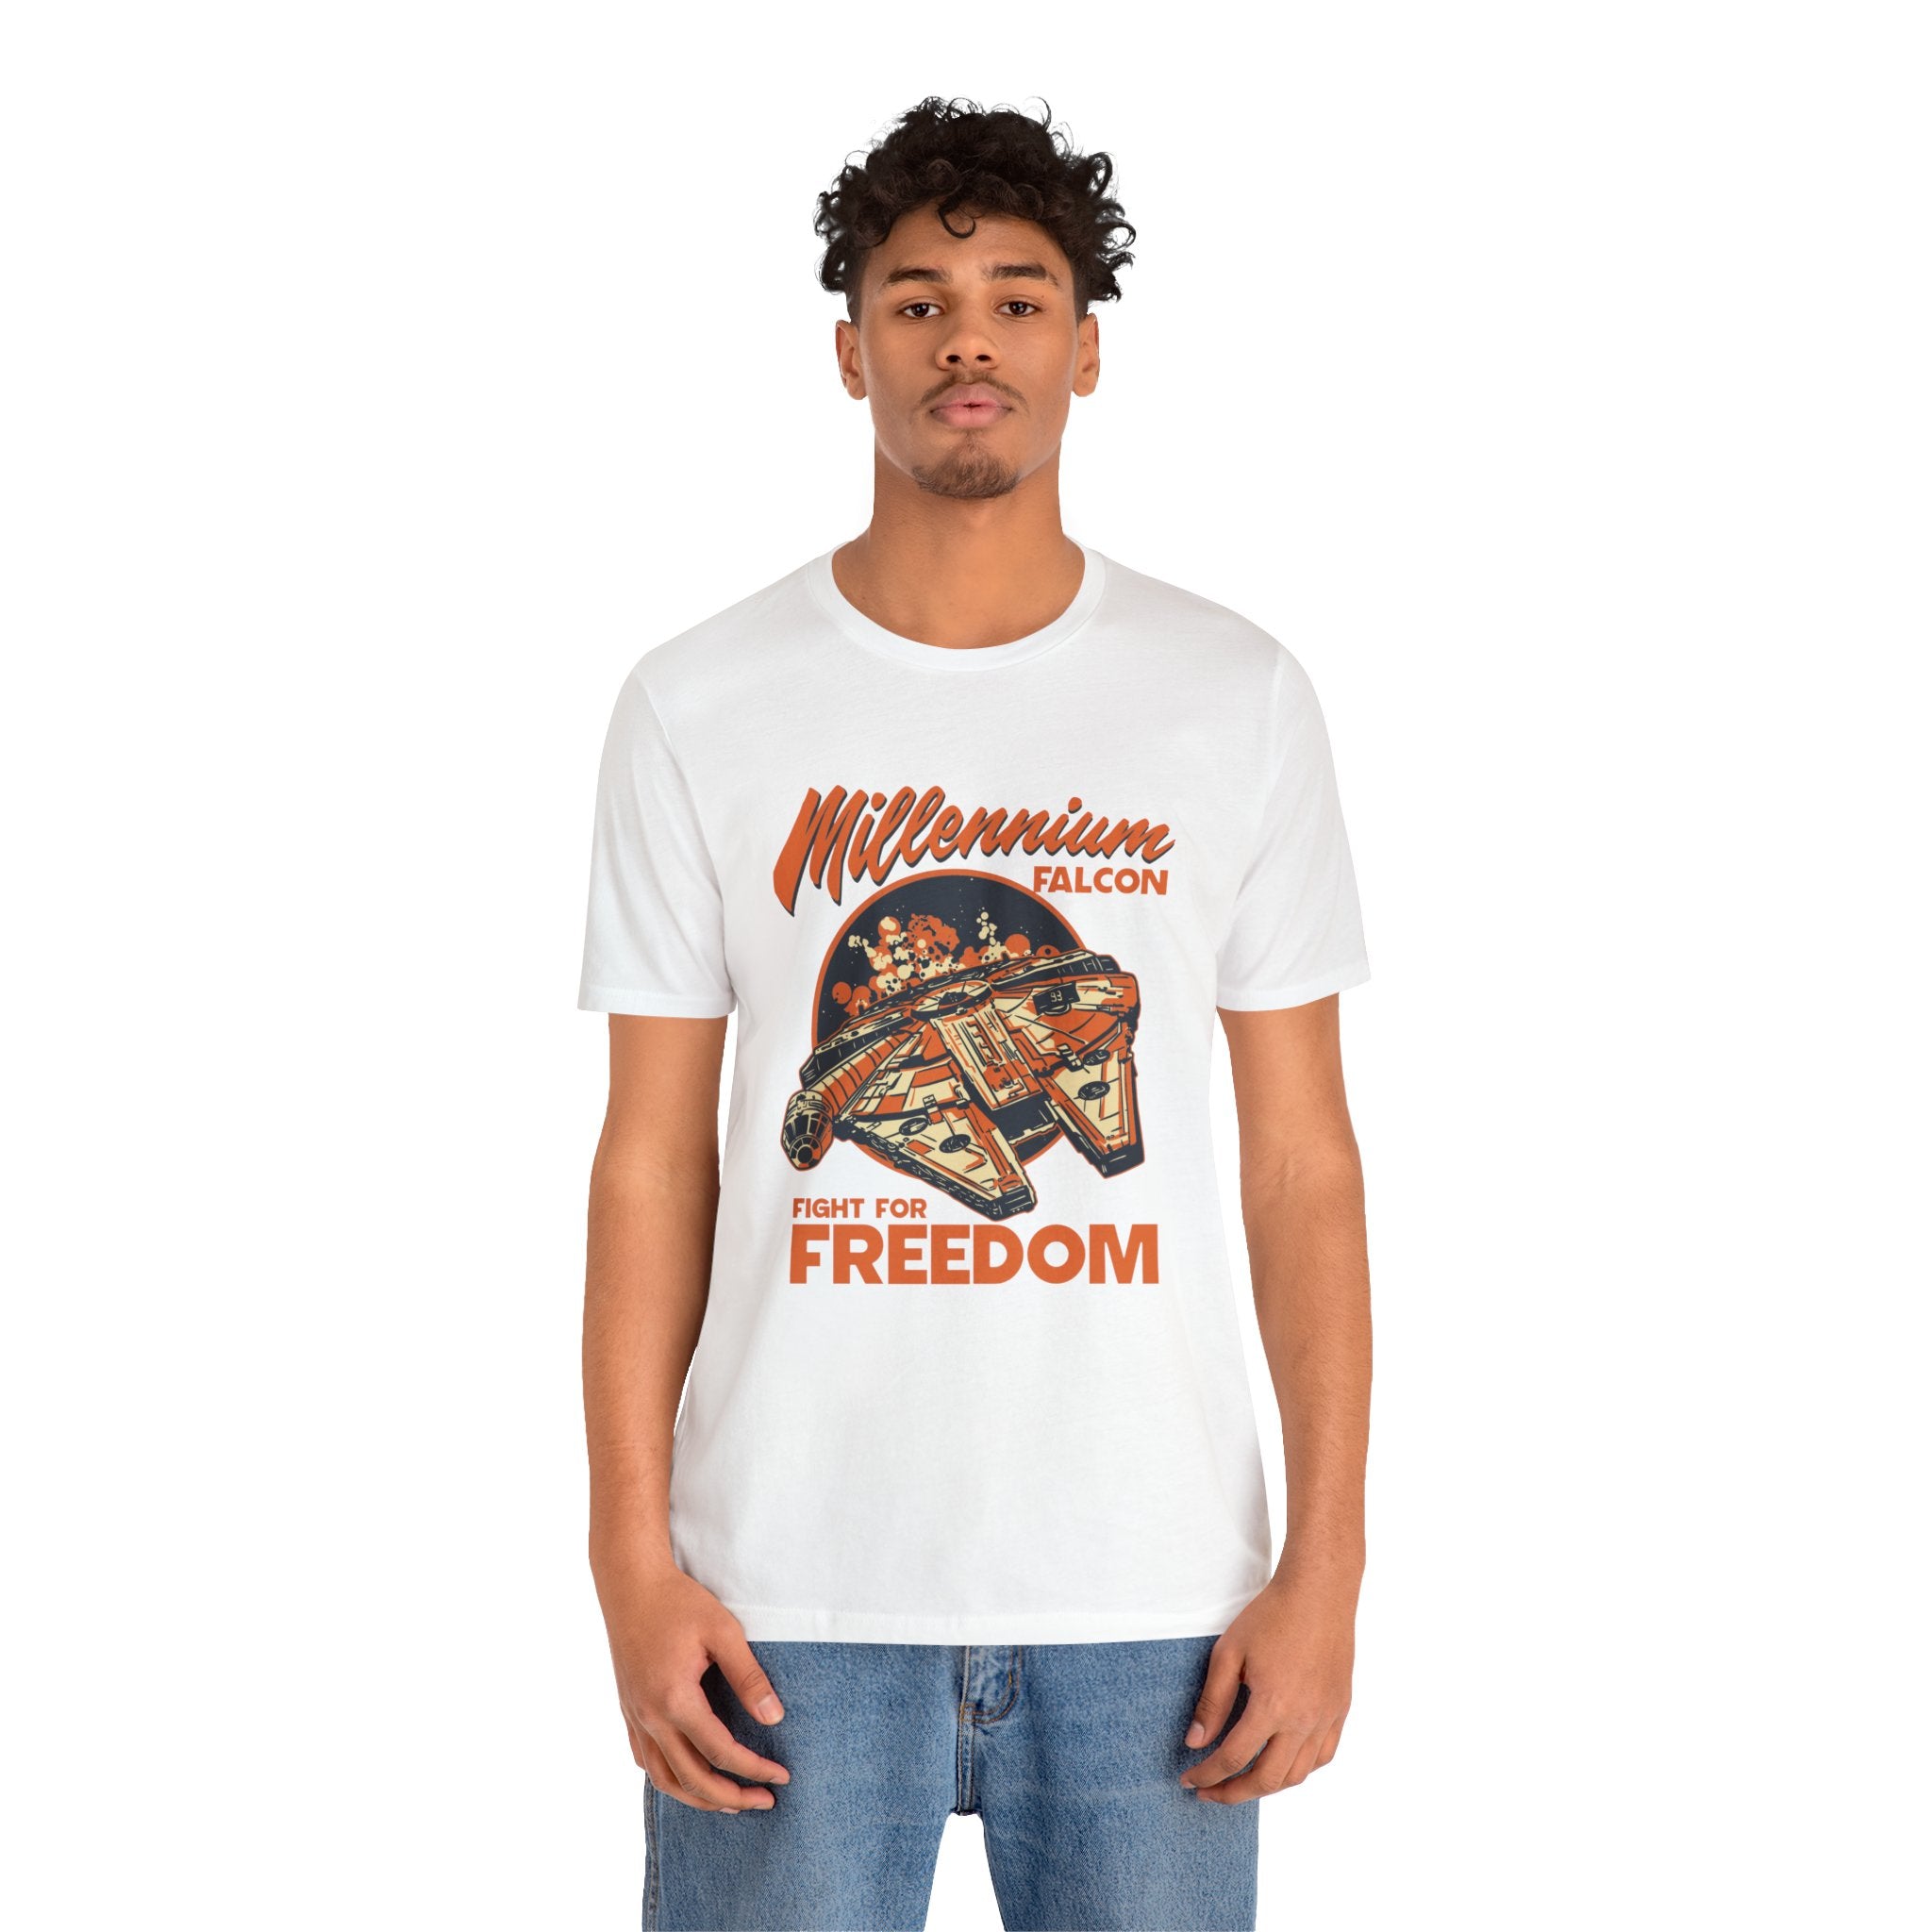 A young man wearing a white unisex jersey tee with a quality Falcon print and the phrase "fight for freedom," paired with blue jeans.